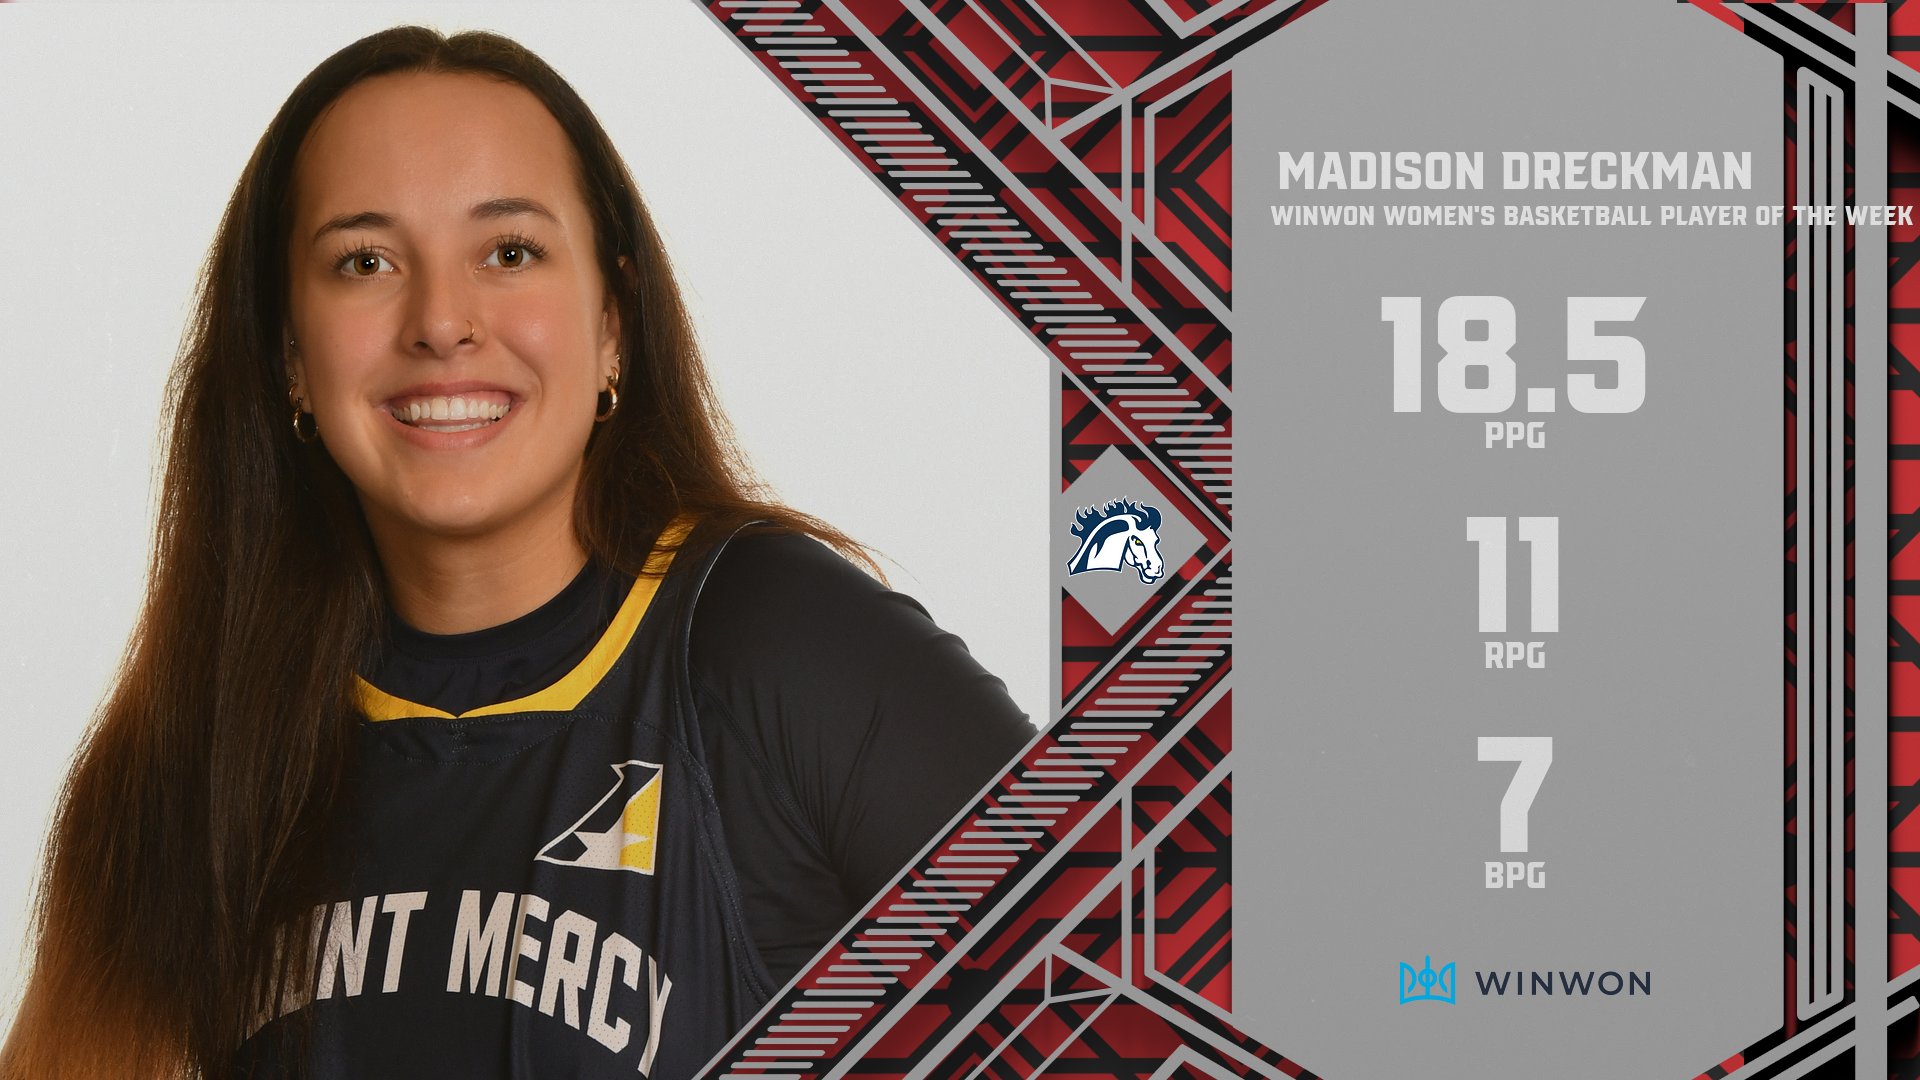 Mount Mercy’s Madison Dreckman Named WinWon Women’s Basketball Player of the Week